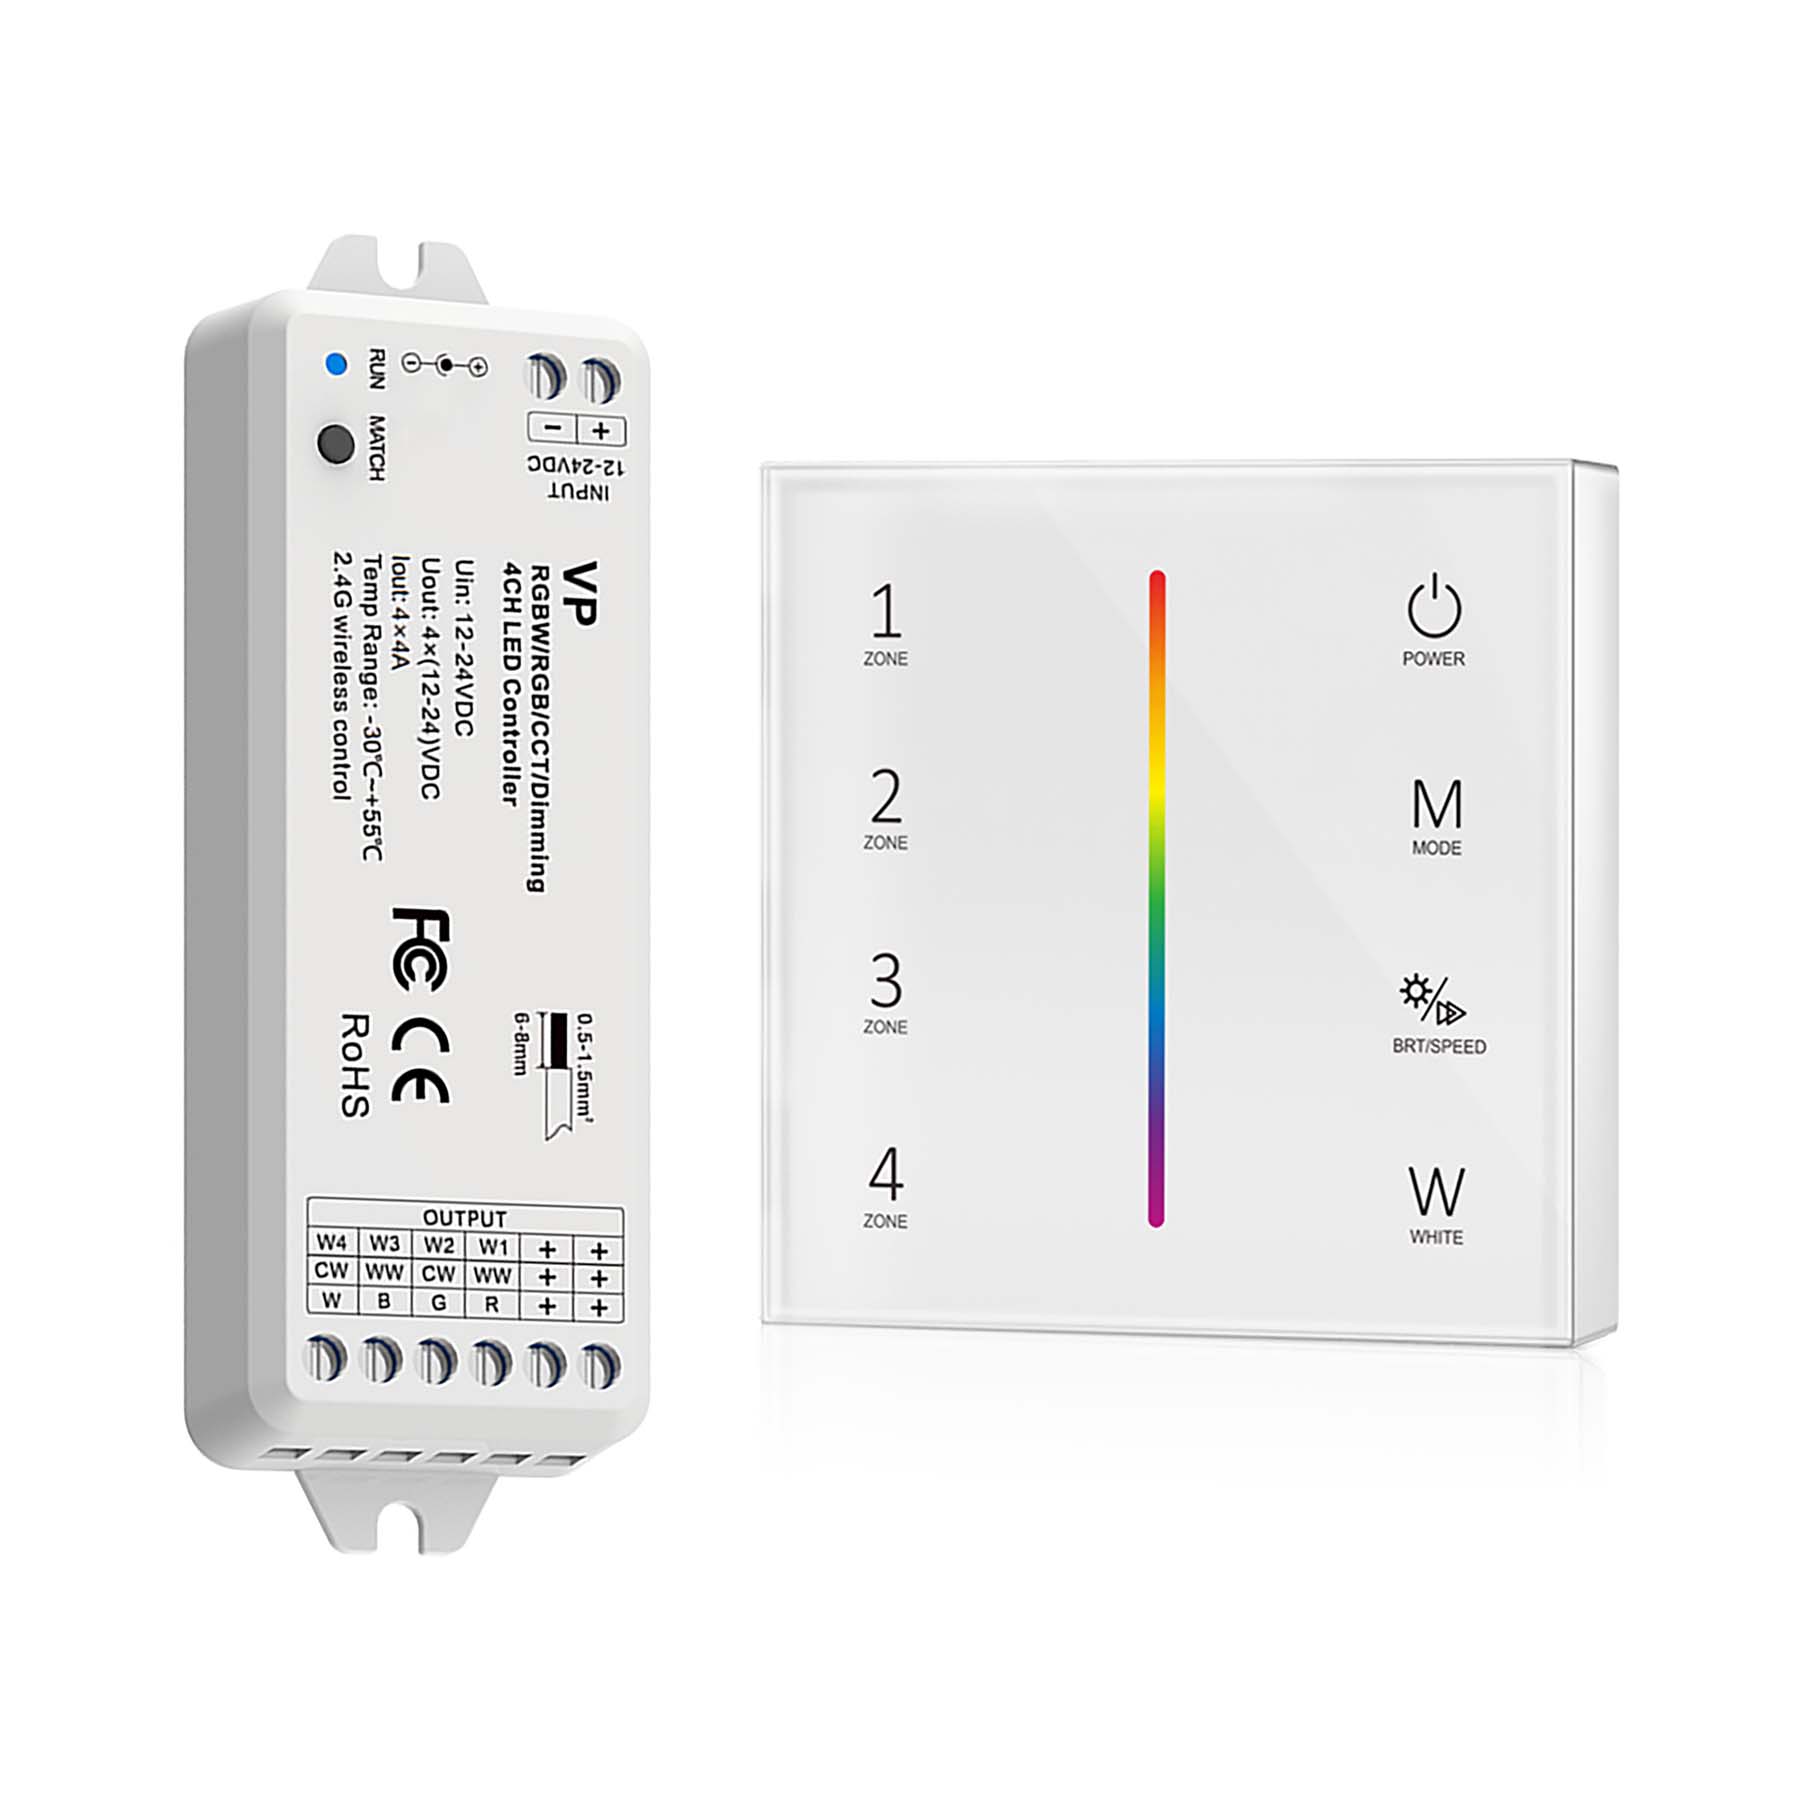 G.W.S. LED White LED 12-24V DC RGB/RGBW Controller VP + 4 Zone Panel Remote Control 2*AAA Battery T24